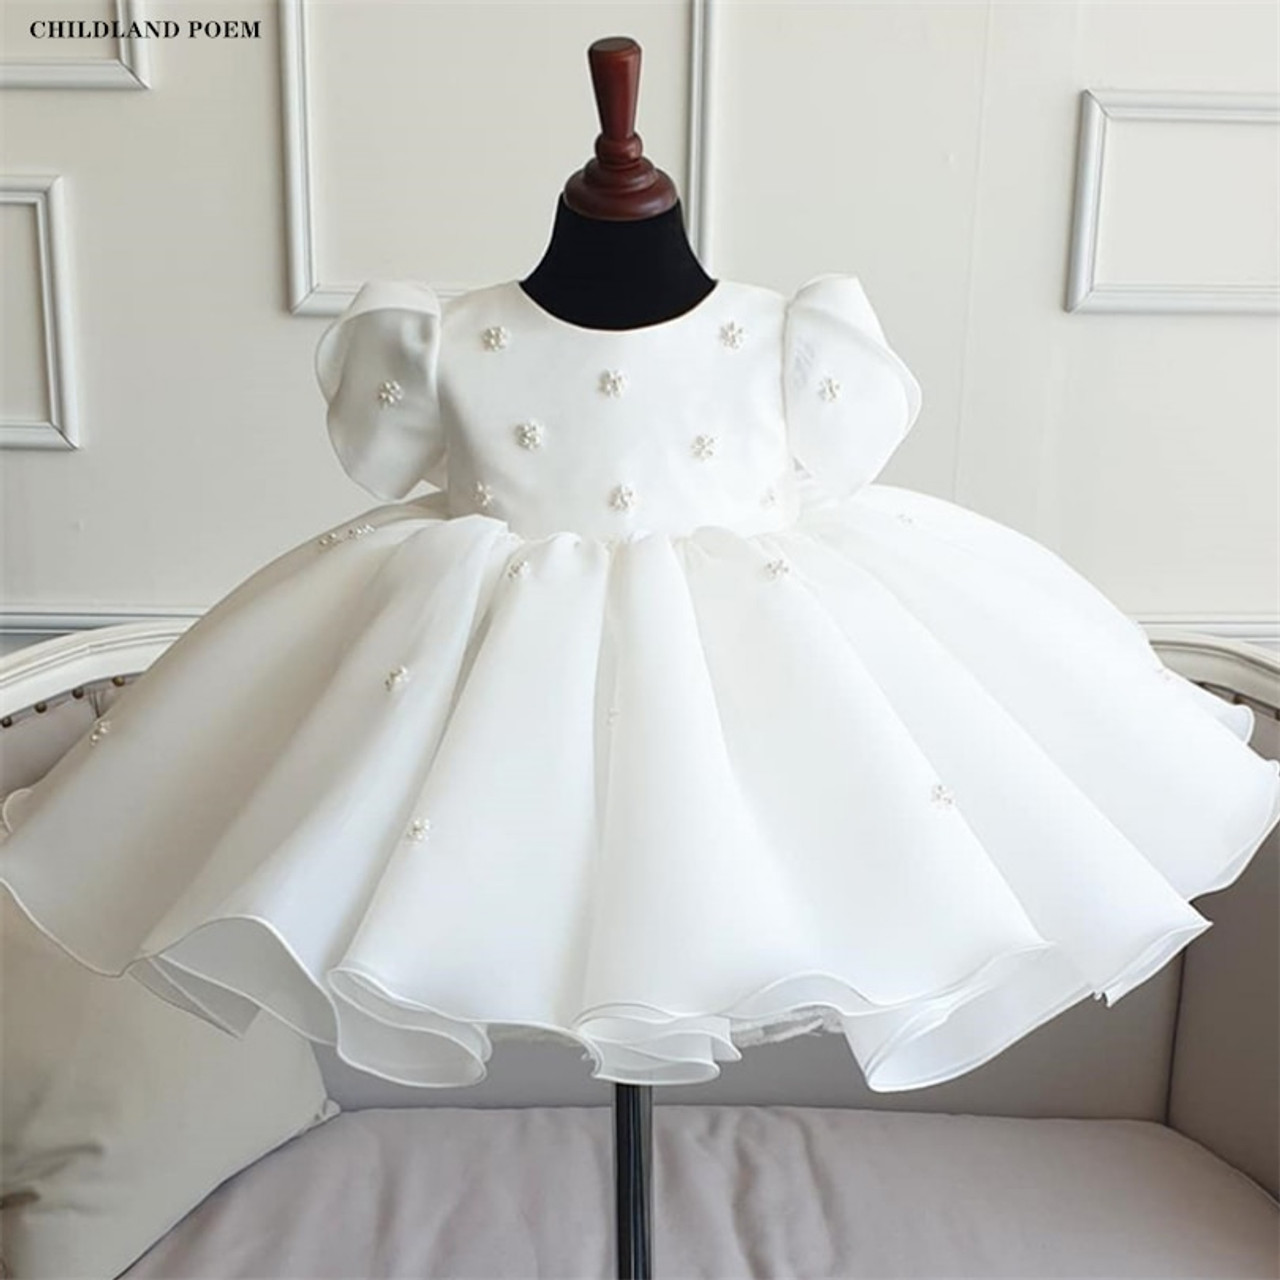 The Cutest Baby Wedding Outfits: 34 Wedding Outfit Ideas for Babies and  Toddlers - hitched.co.uk